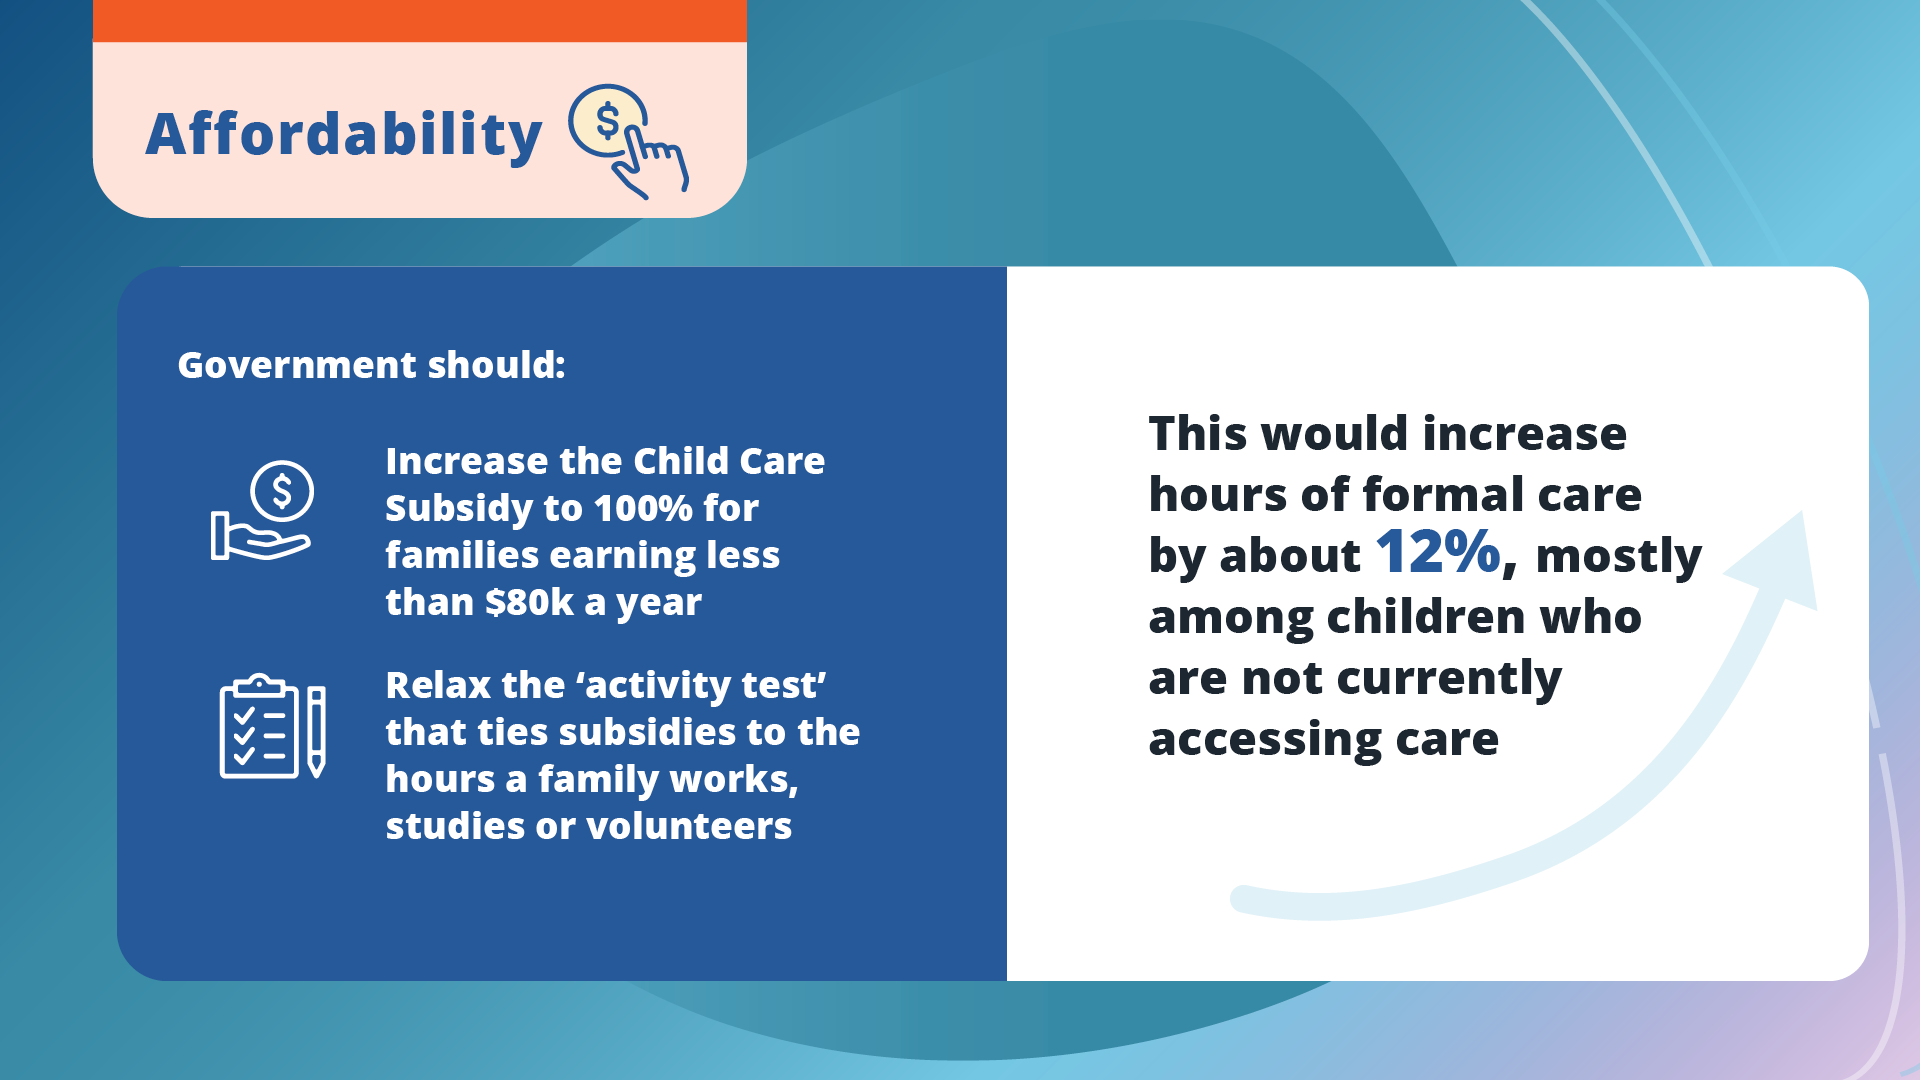 Affordability. Government should: Increase the Child Care Subsidy to 100% of the hourly rate cap for families earning less than $80k a year. Relax the ‘activity test’ that ties subsidies to the hours a family works, studies or volunteers. This would increase hours of formal care by about 12%, mostly among children who are not currently accessing care.